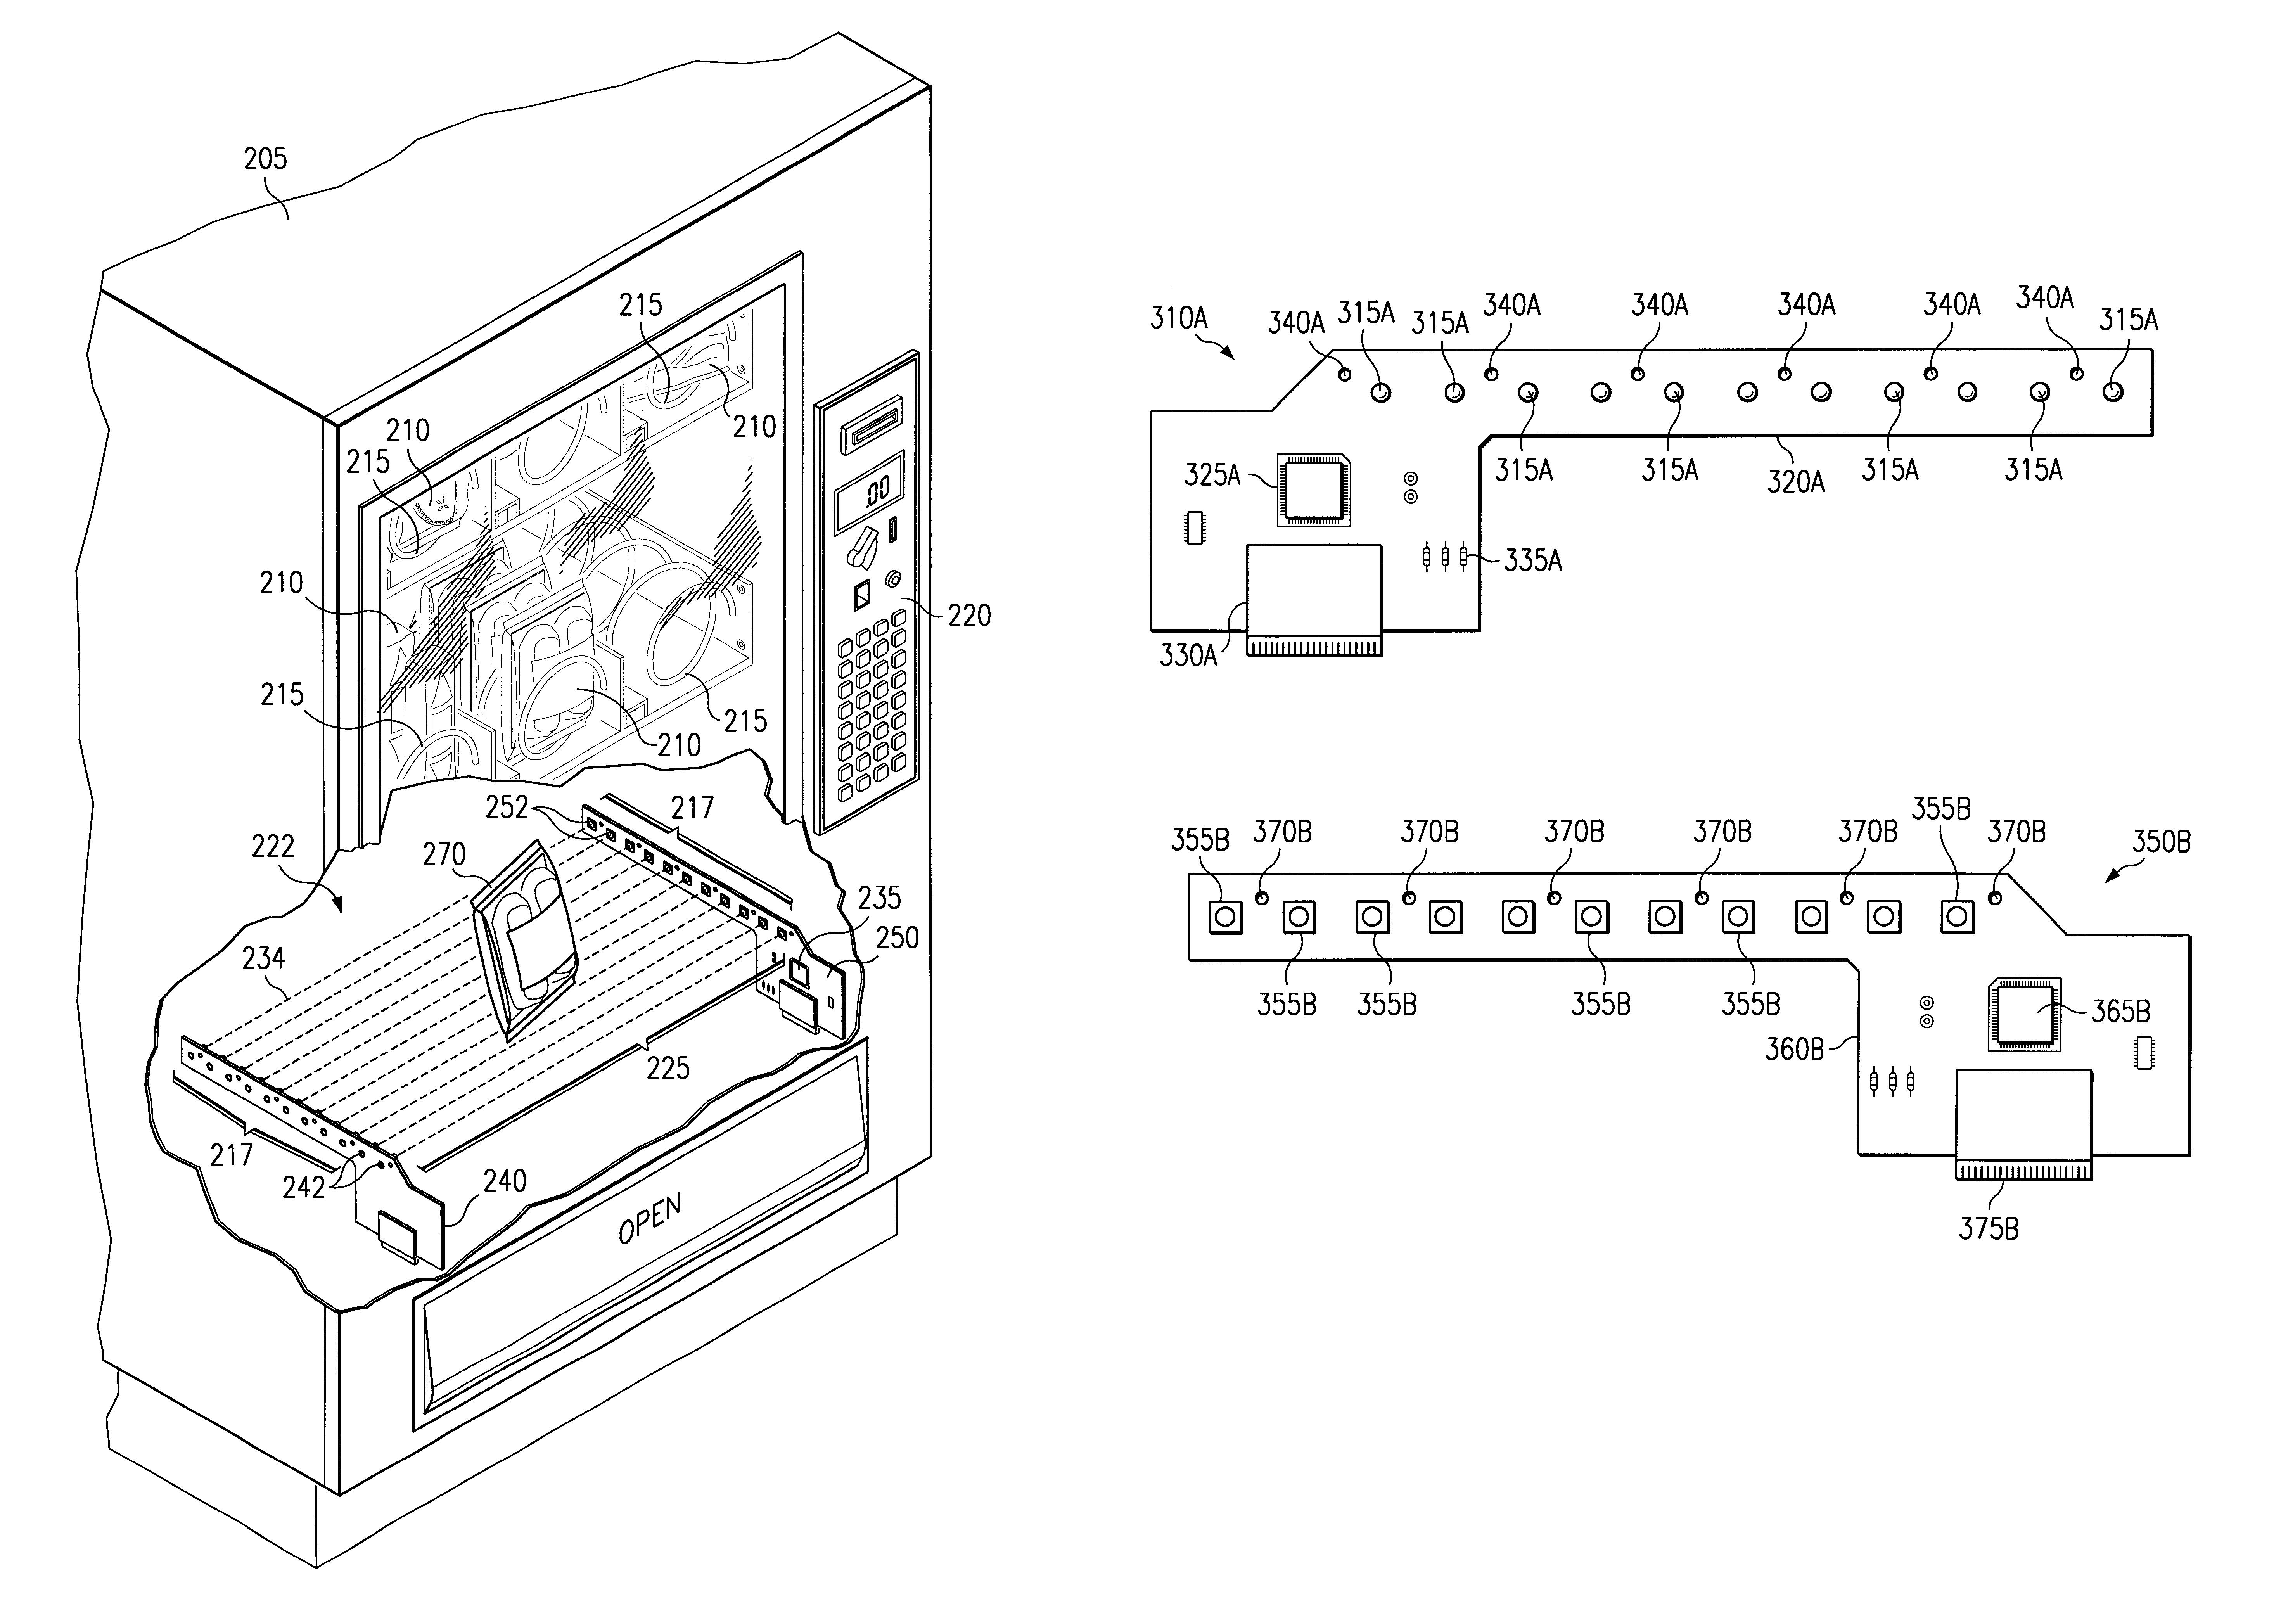 System for accomplishing product detection